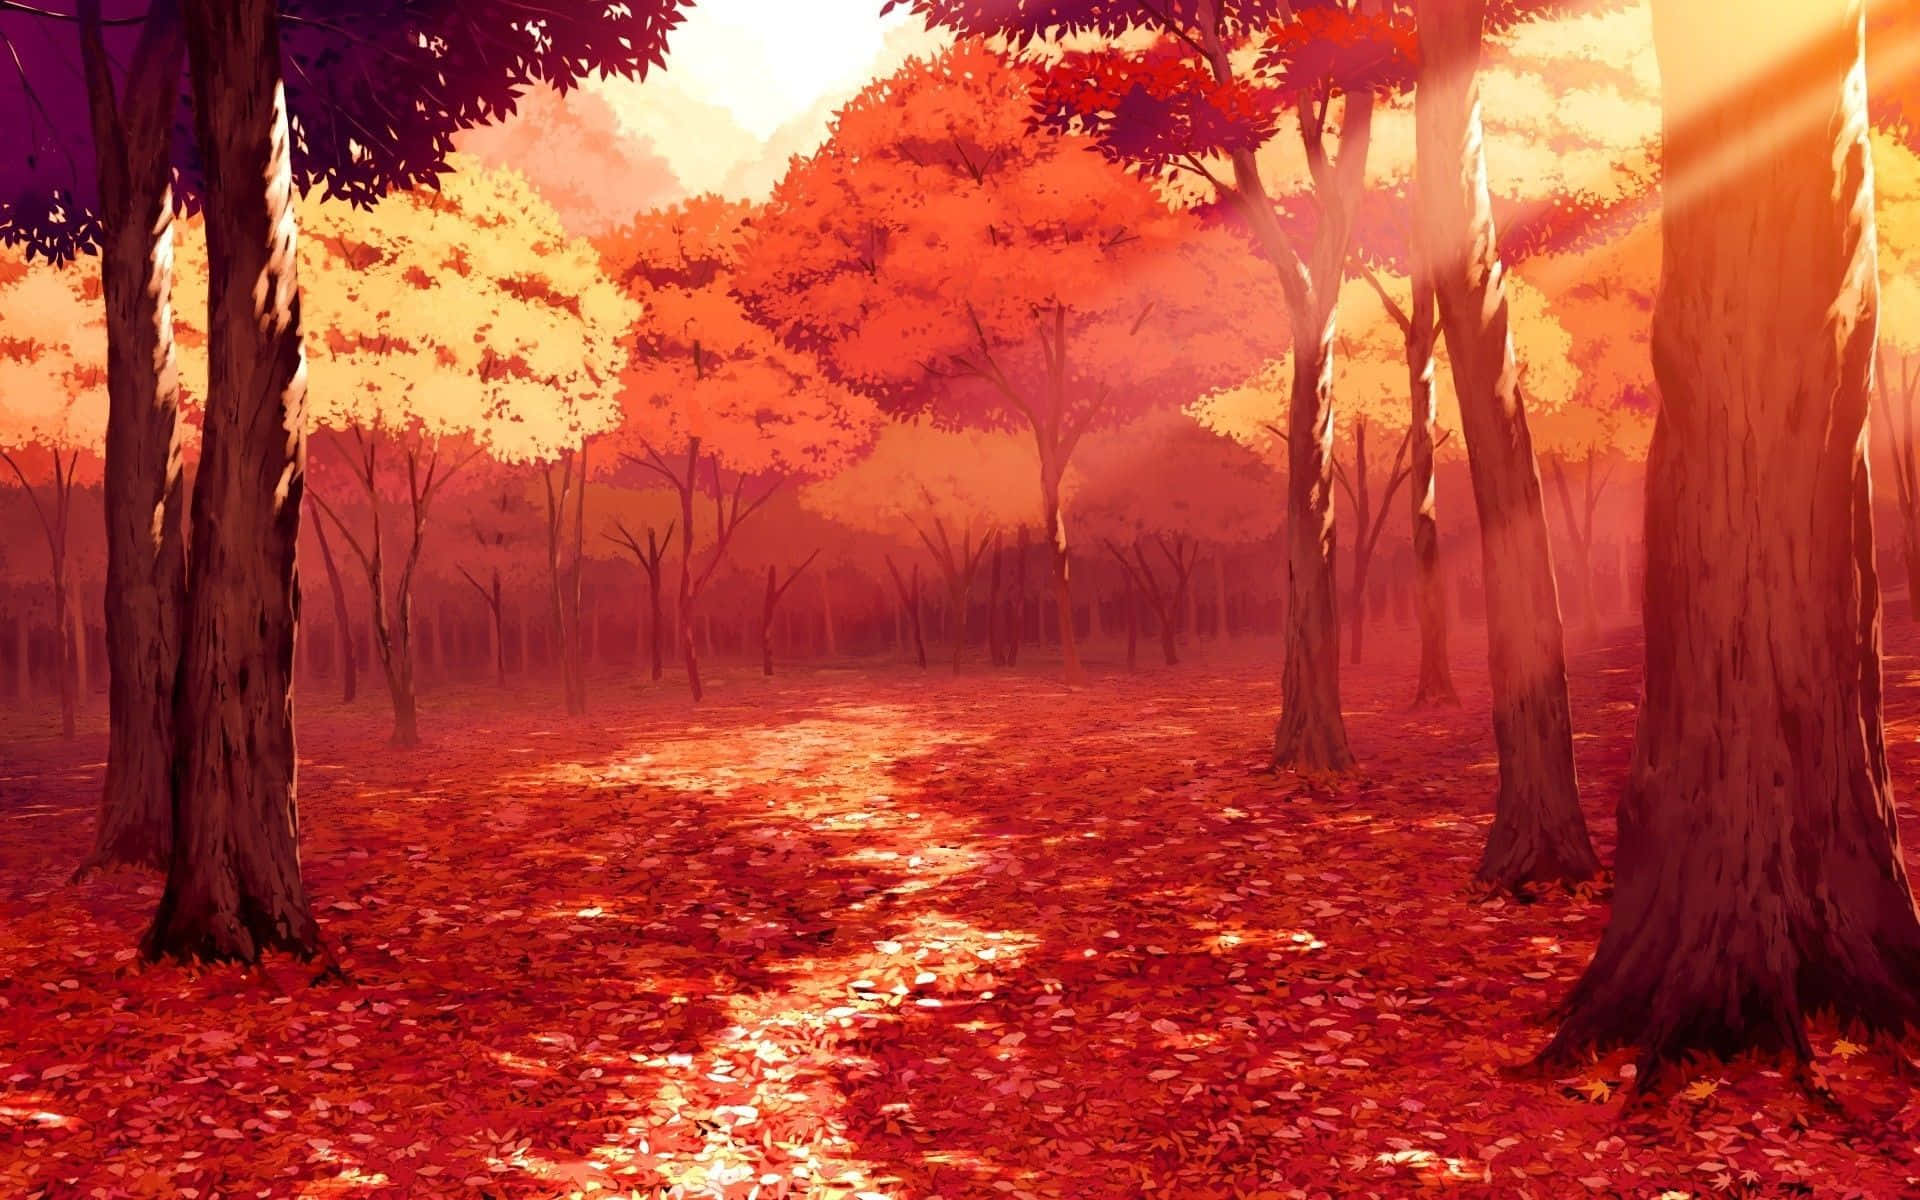 Free Red Anime Aesthetic Wallpaper Downloads, [100+] Red Anime Aesthetic  Wallpapers for FREE 